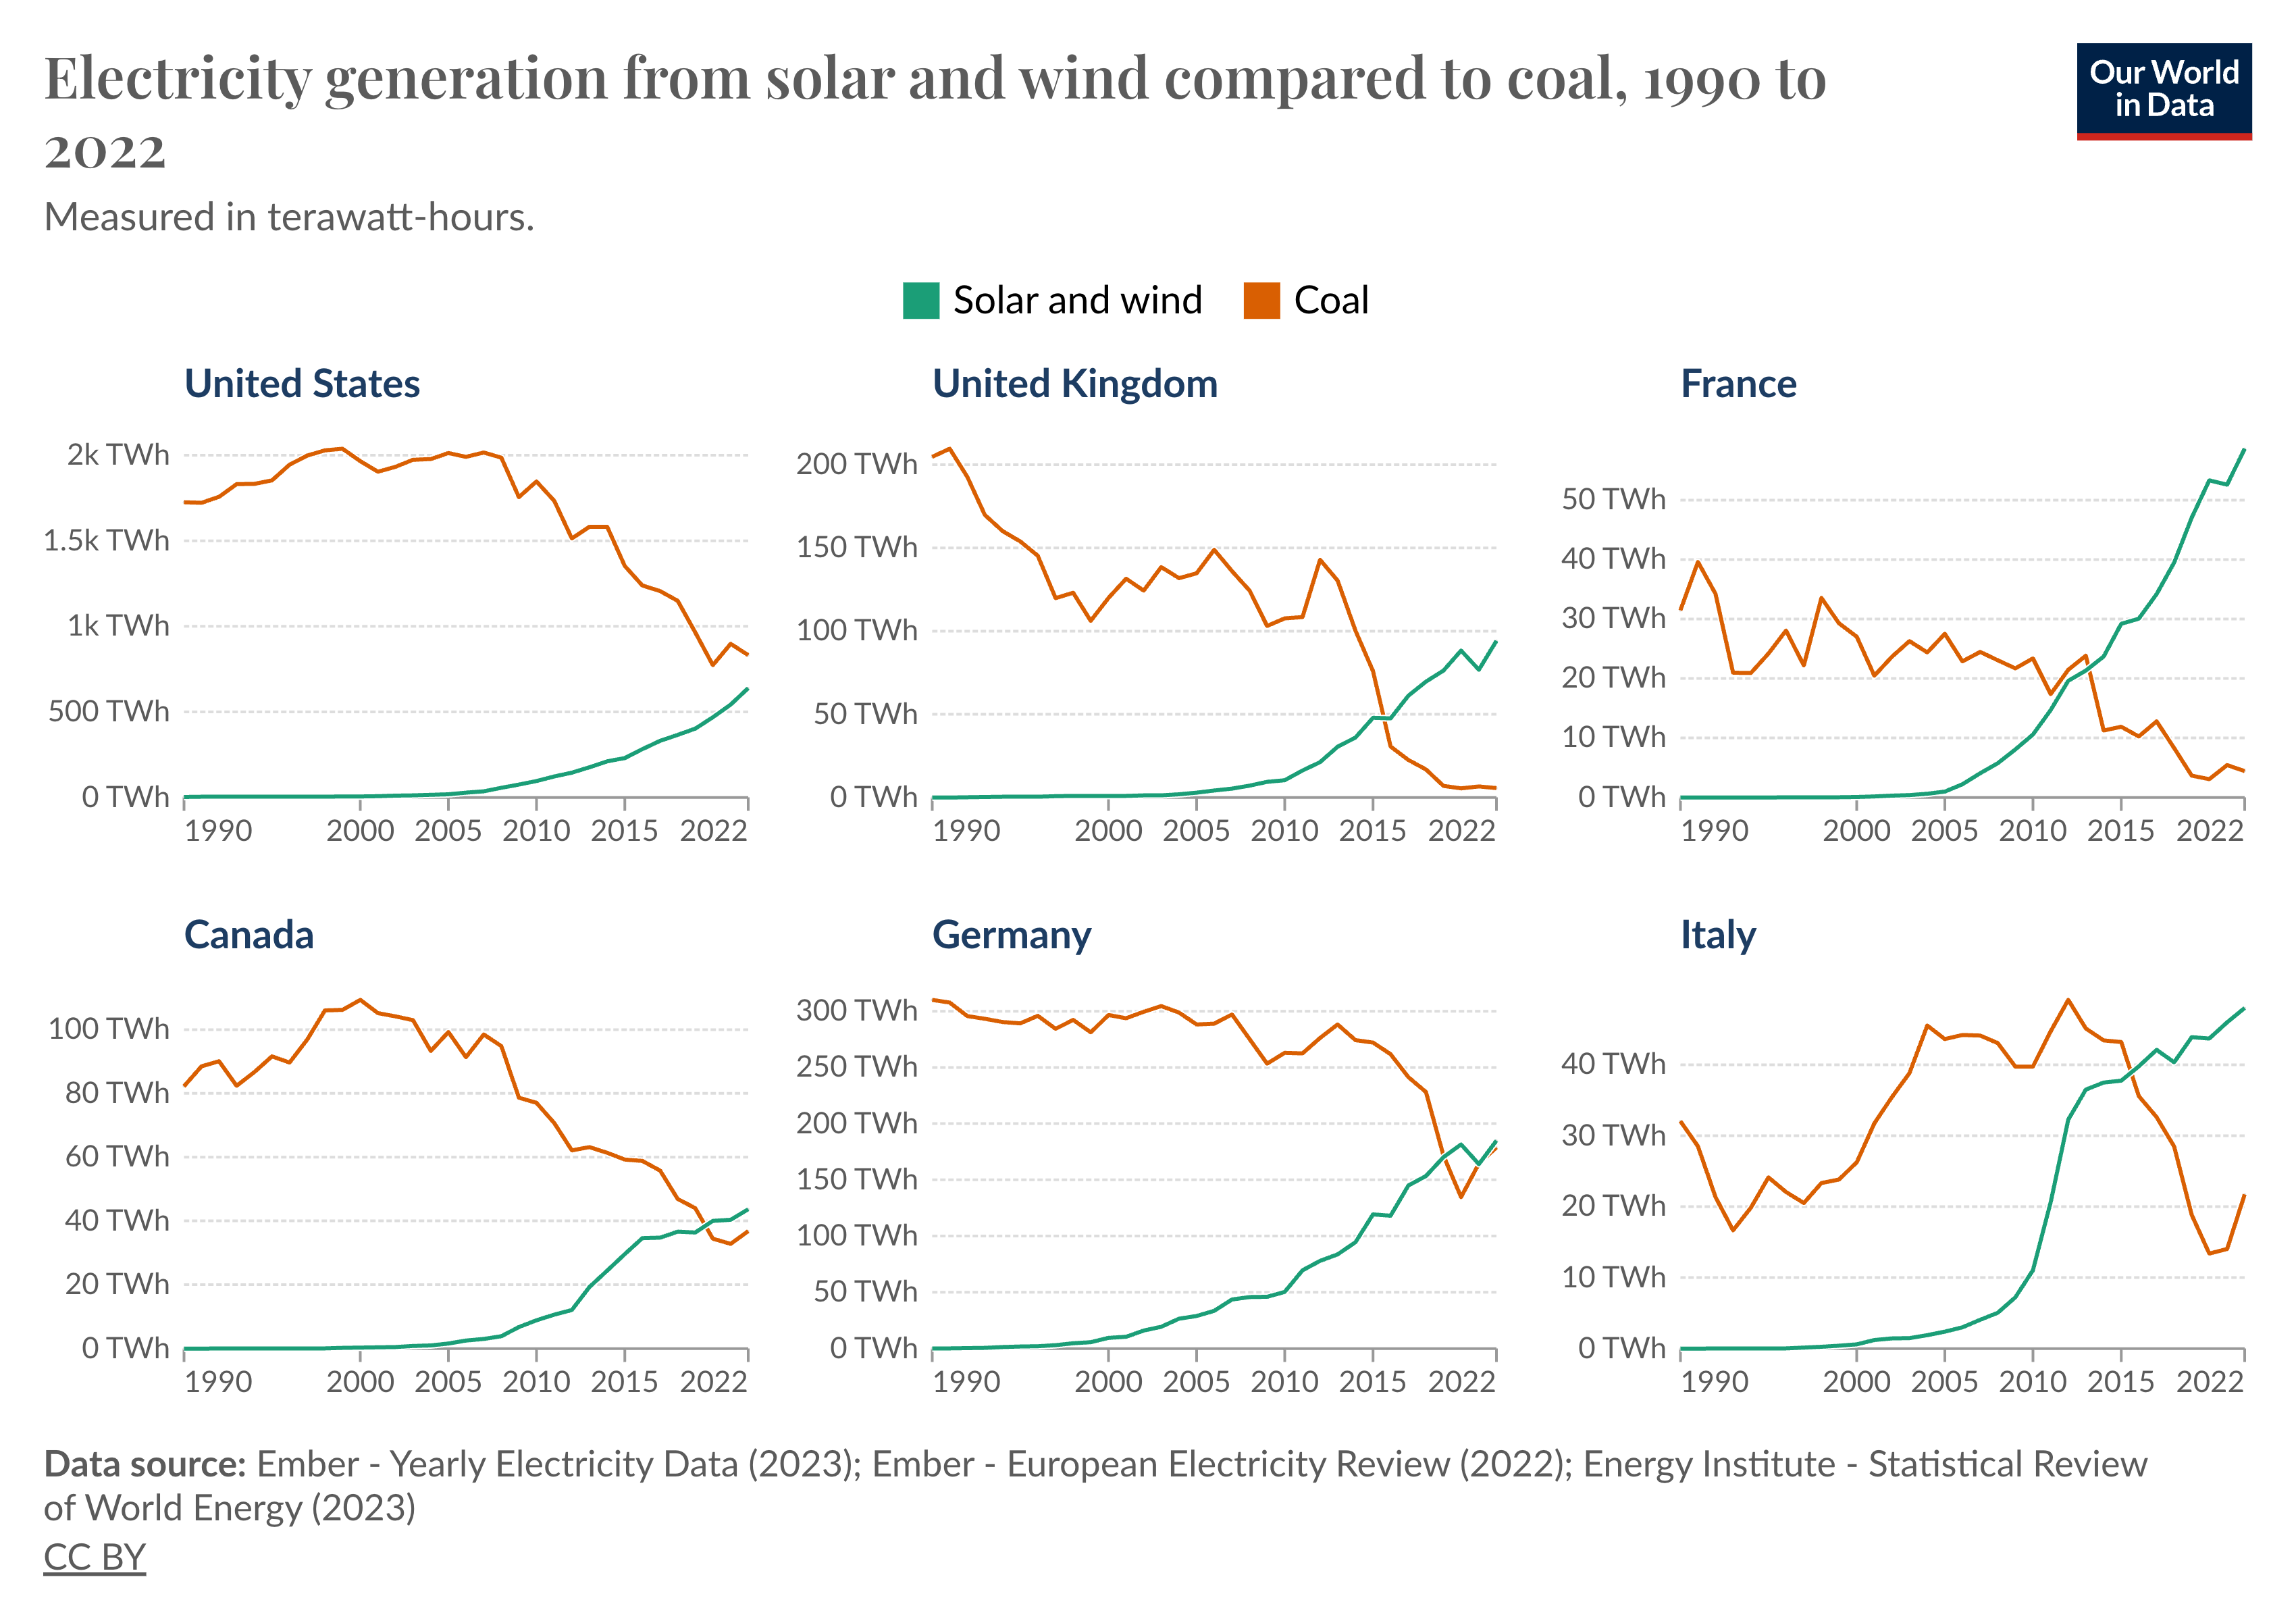 Solar and wind gain an edge over coal in a number of countries